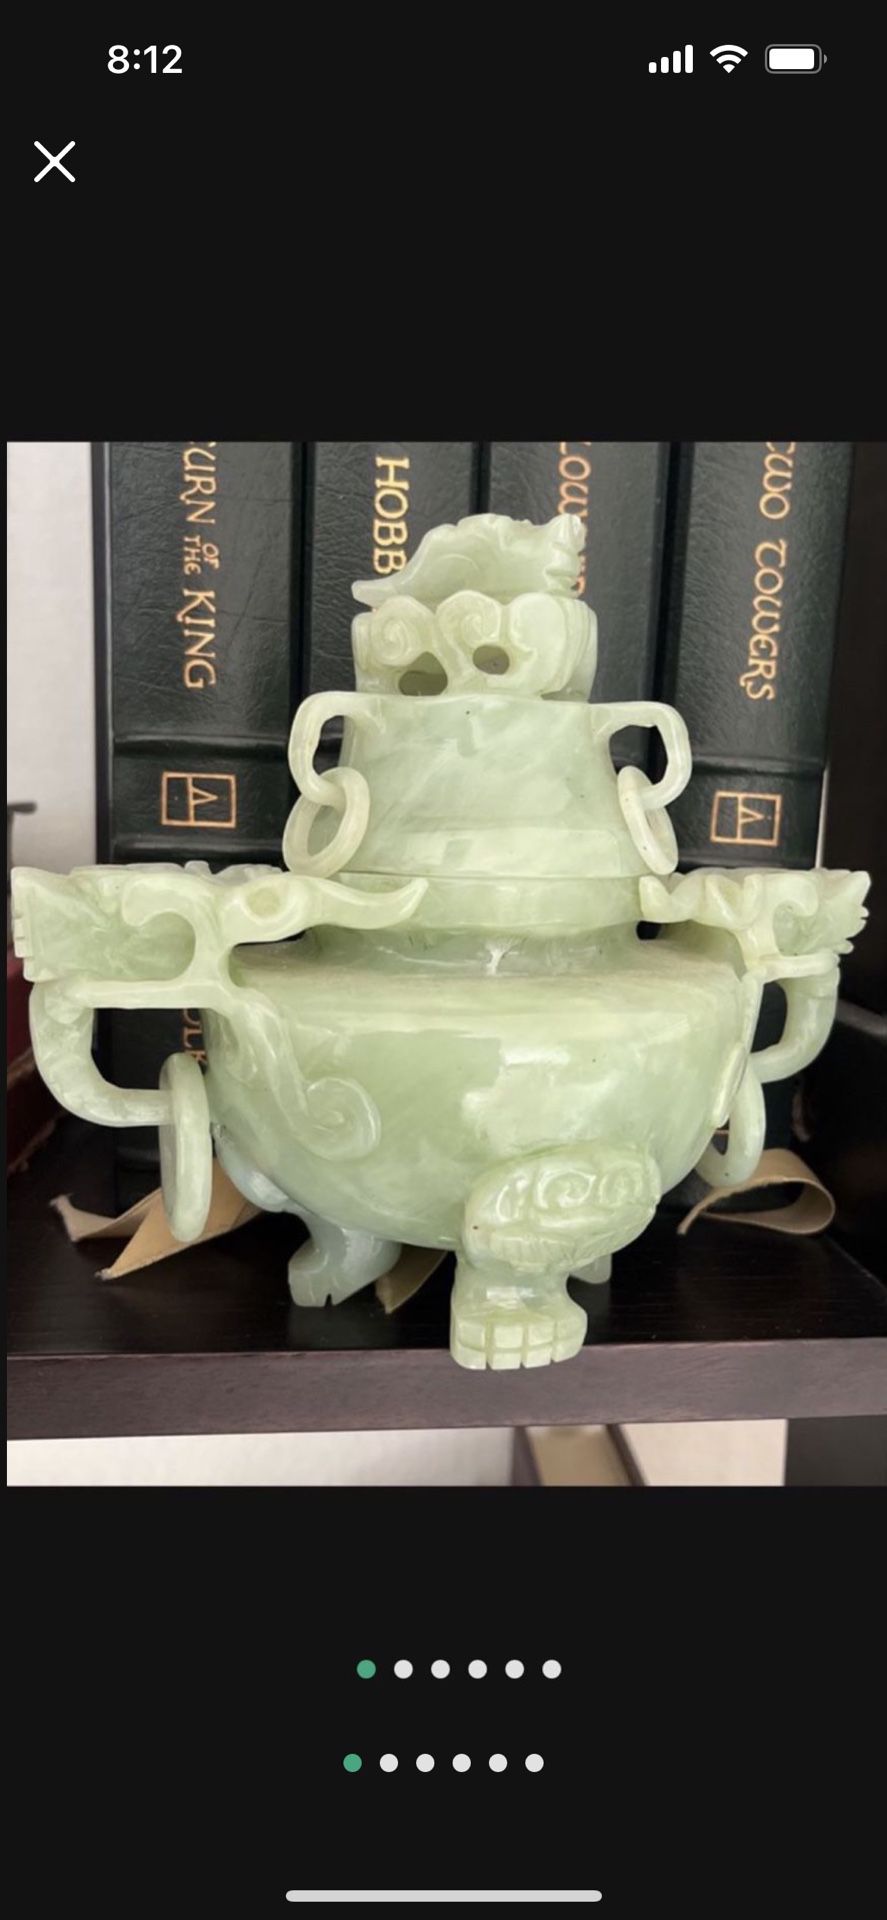 Jade. Dragon Vase. Collectable.  Chinese Celadon Jade vase with beautiful carvings of dragon faces. Includes the top and rings which make an enchantin